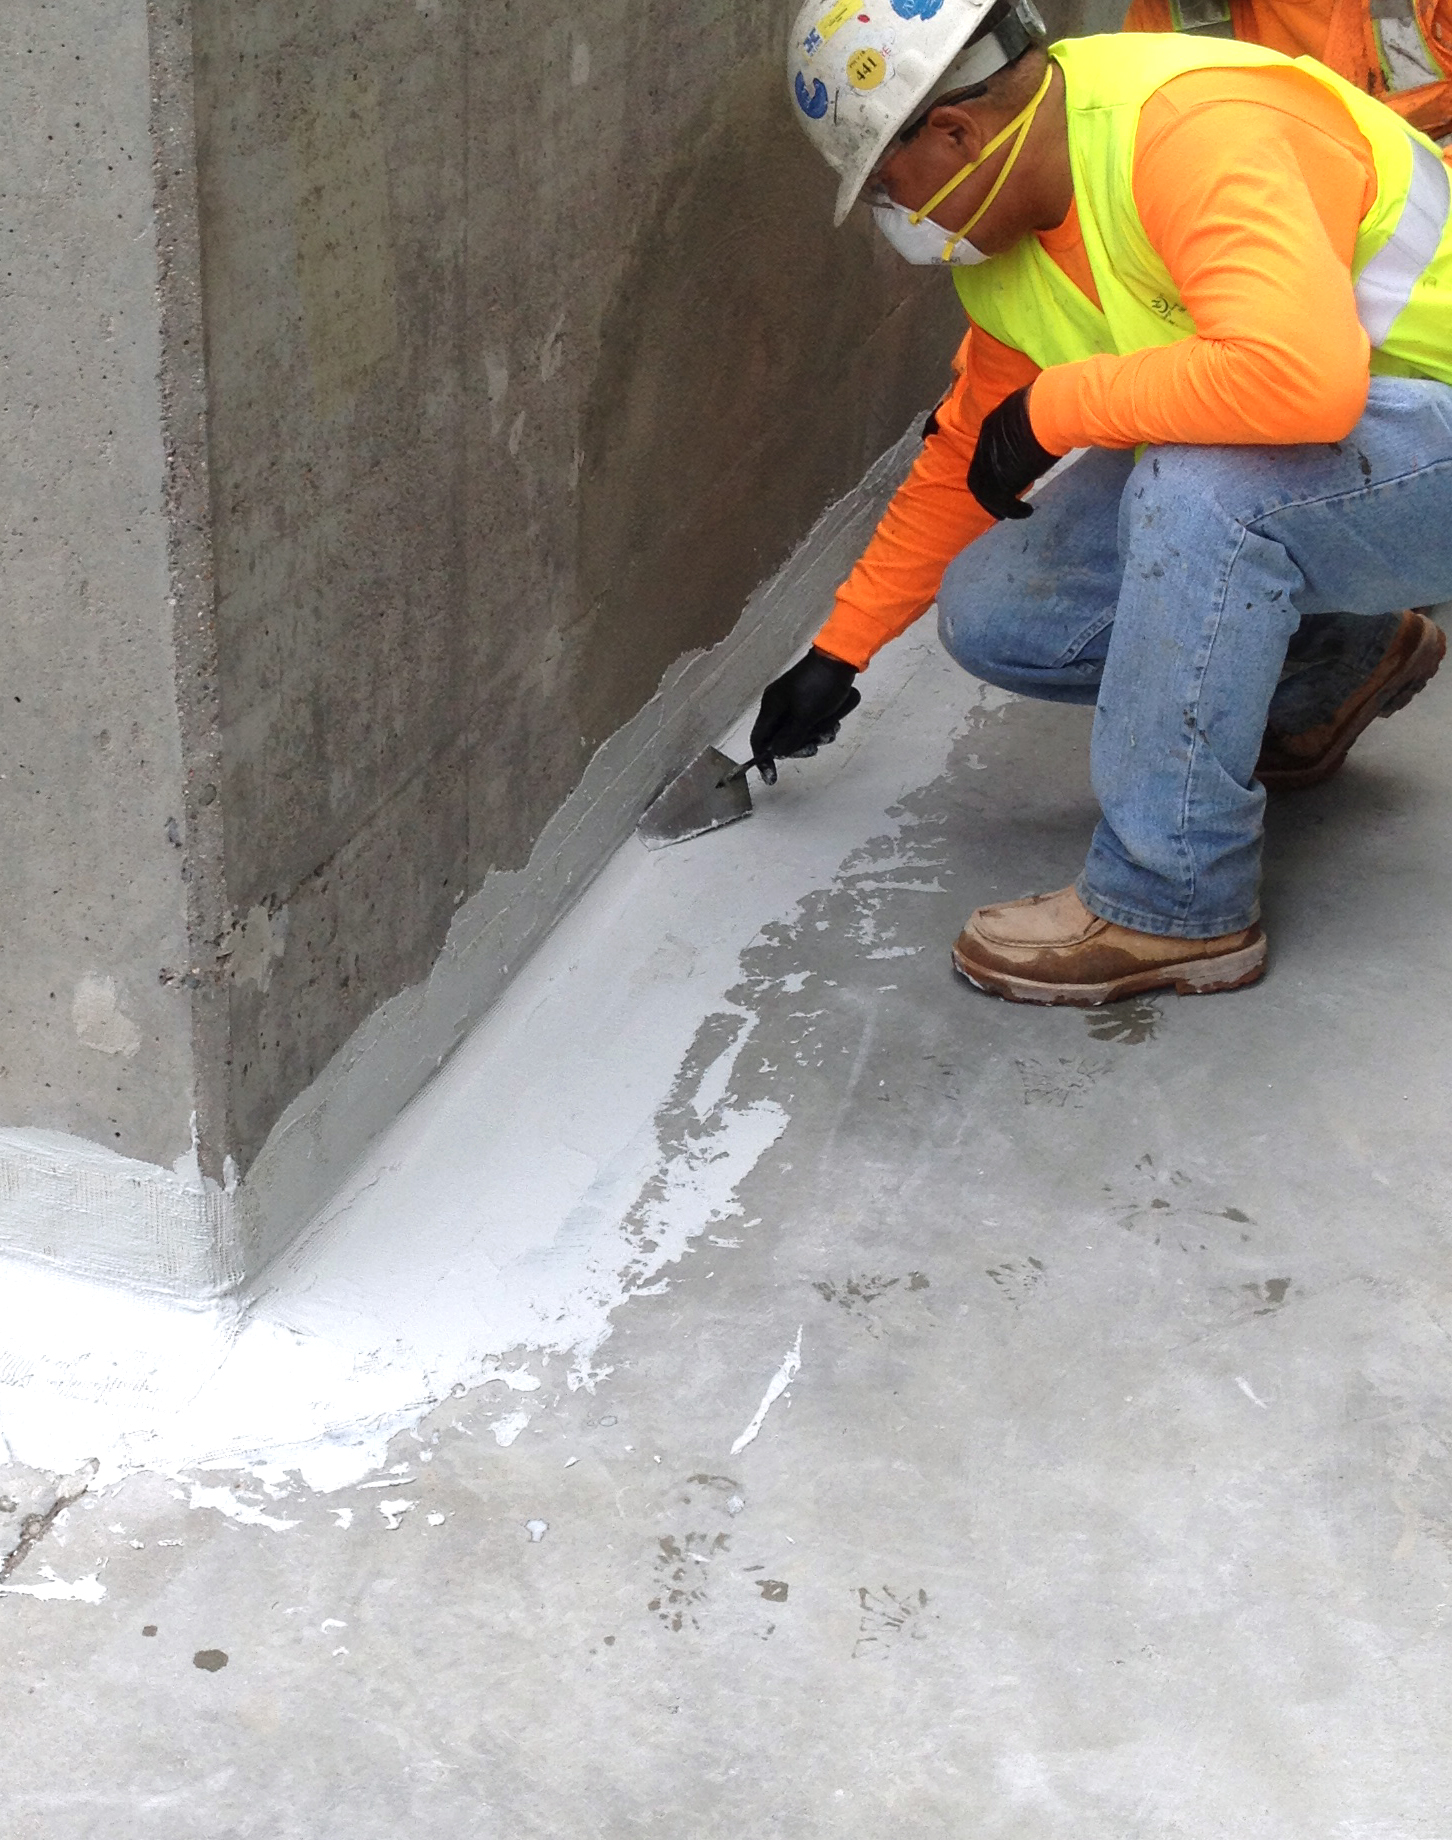 Features such as hydrostatic head resistance, flexibility, crack-bridging capabilities, and vapor permeability allow CEM-KOTE FLEX ST to provide waterproofing protection for both positive- and negative-side installations.